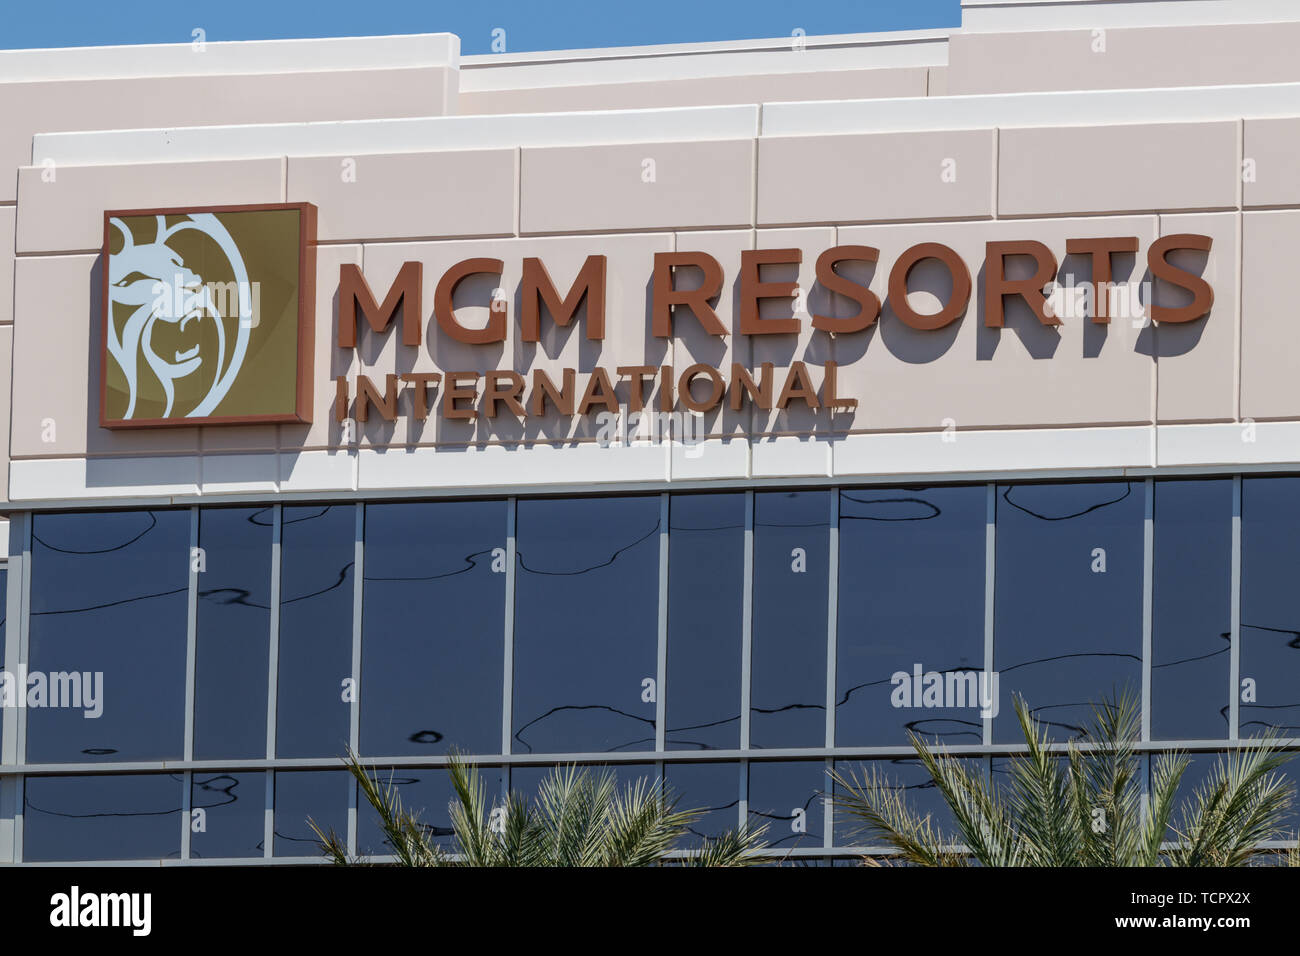 MGM Resorts International office. MGM Resorts International is a global hospitality and entertainment company. Stock Photo